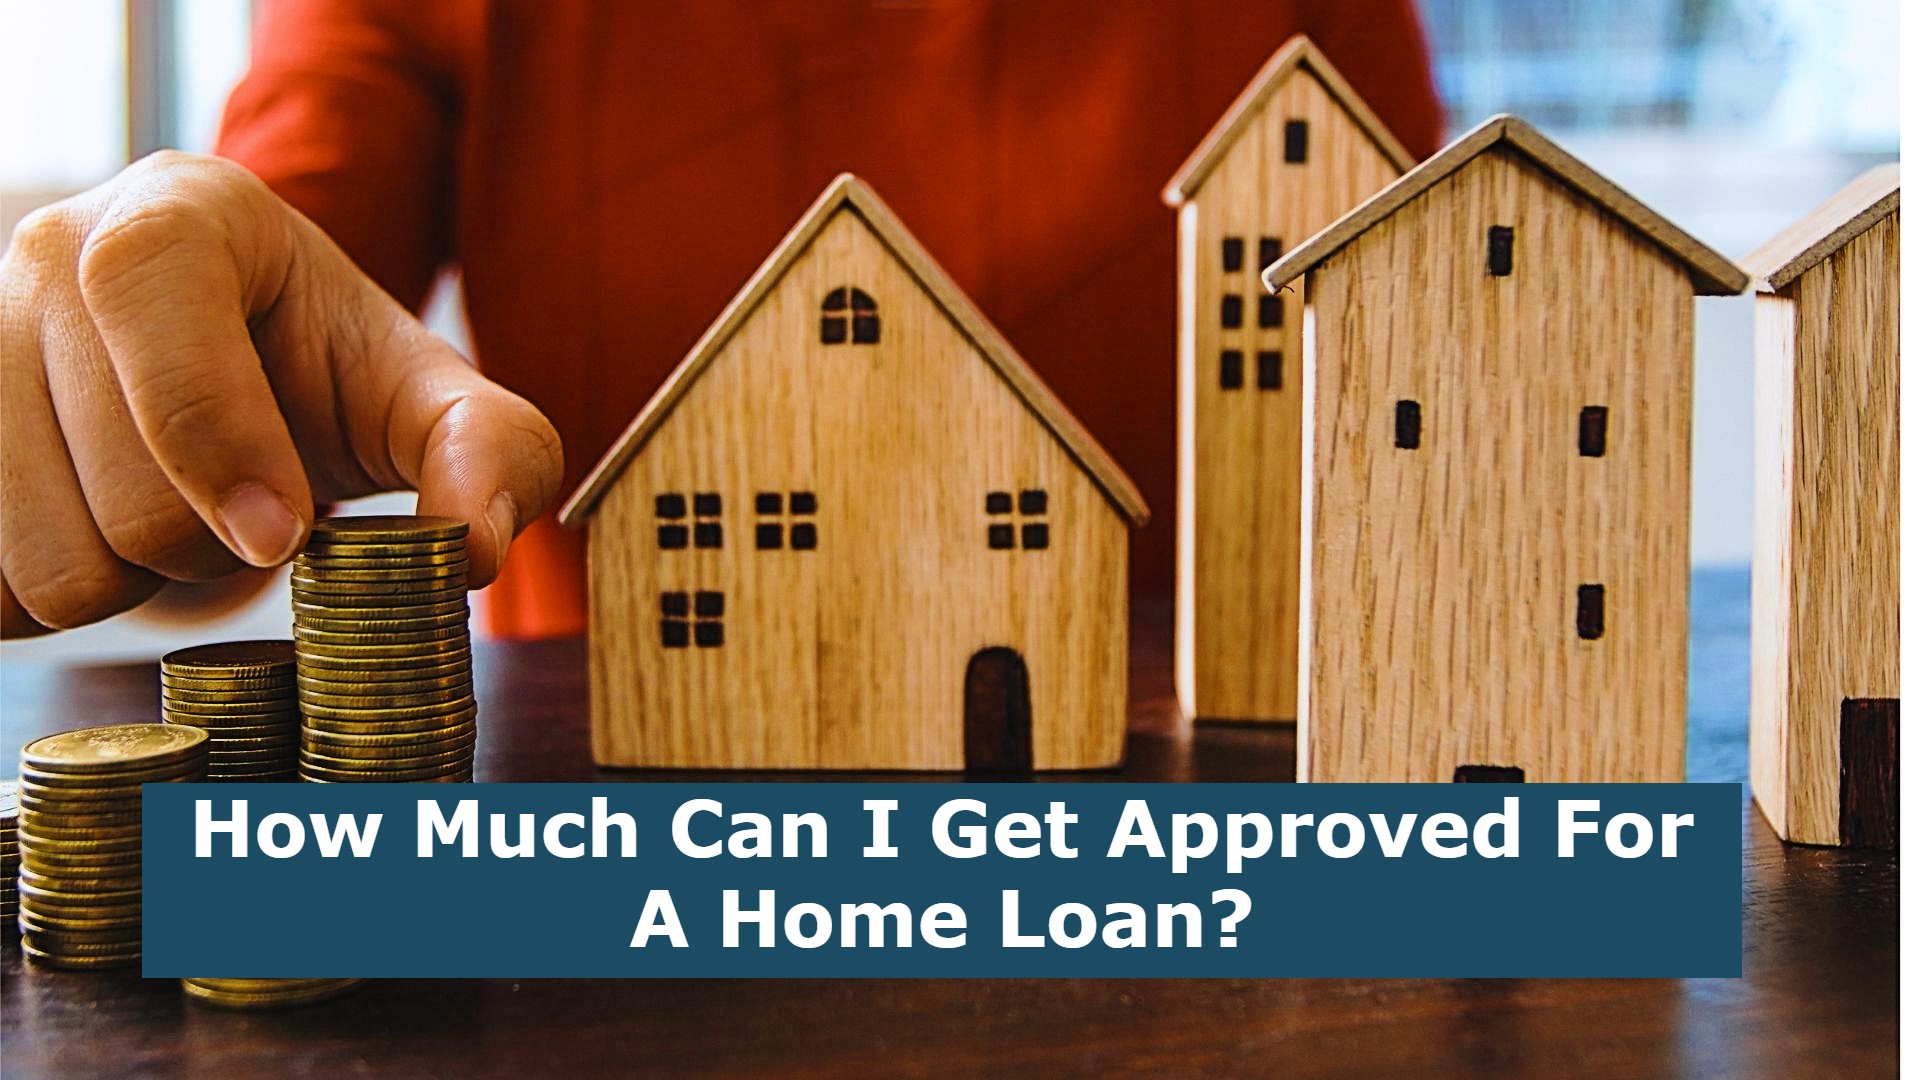 How Much Can I Get Approved For A Home Loan?